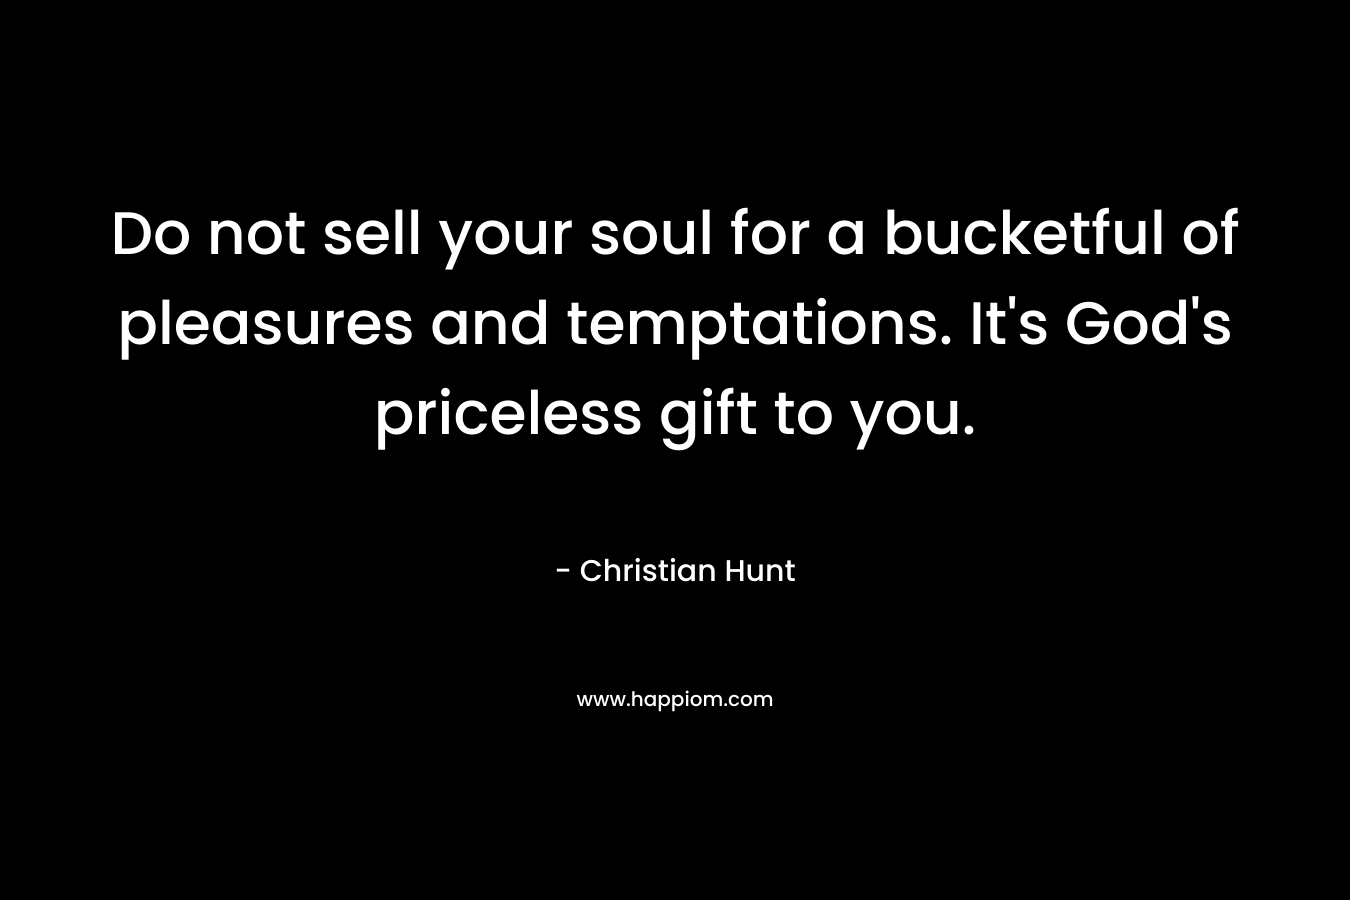 Do not sell your soul for a bucketful of pleasures and temptations. It’s God’s priceless gift to you. – Christian Hunt